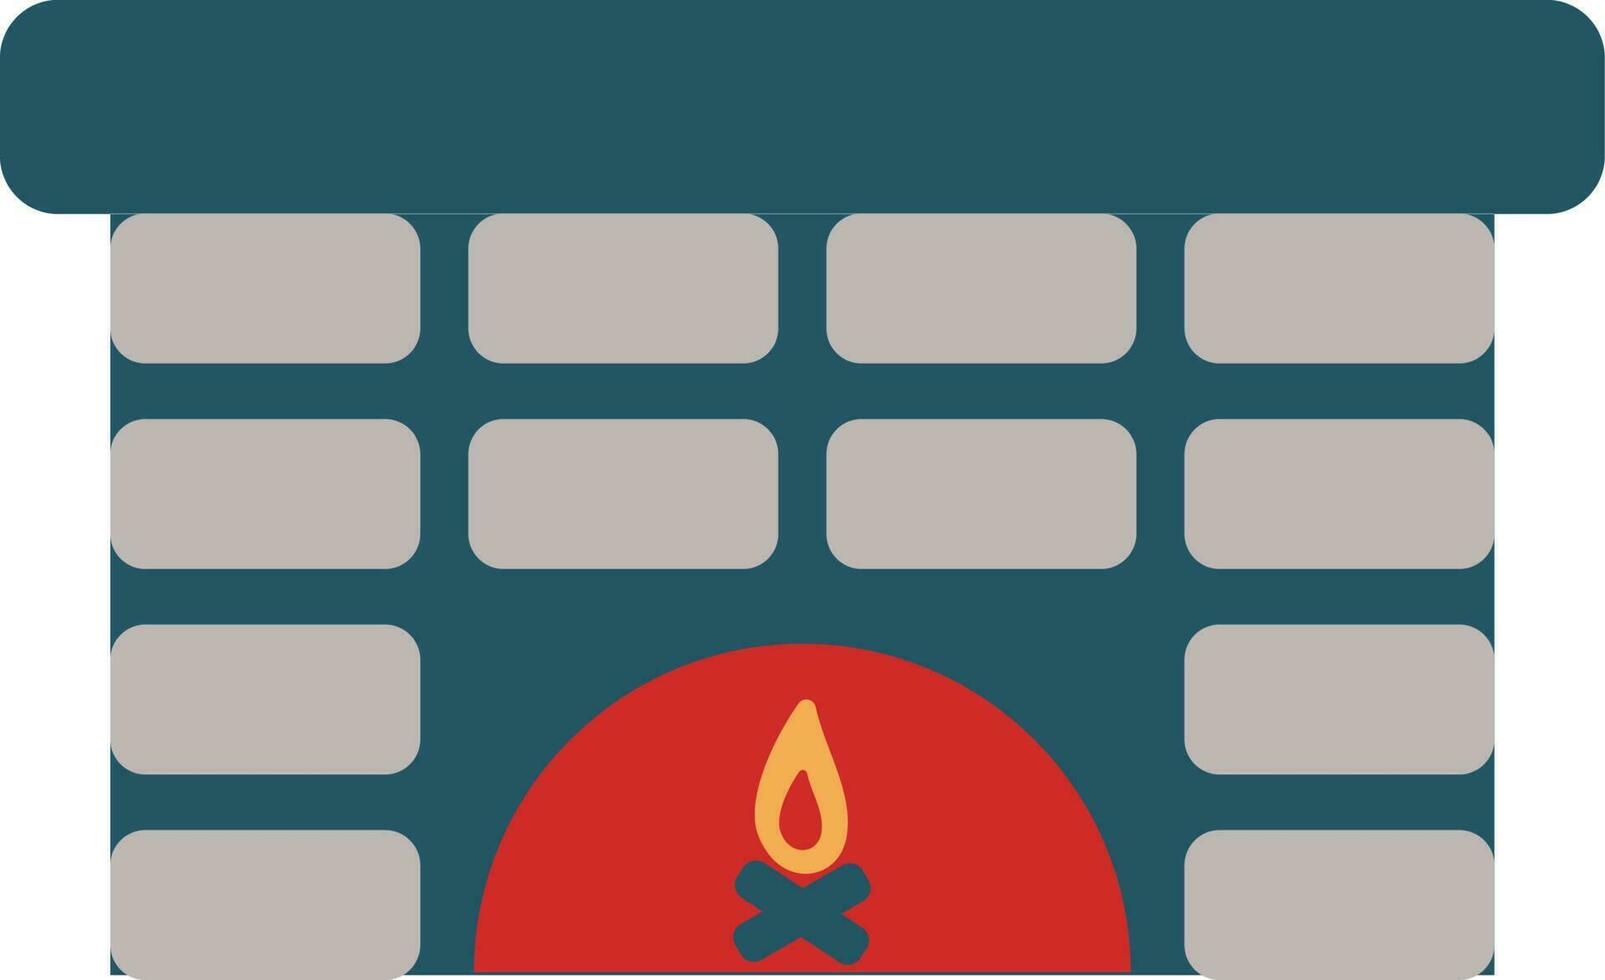 Fireplace icon design house warm. vector